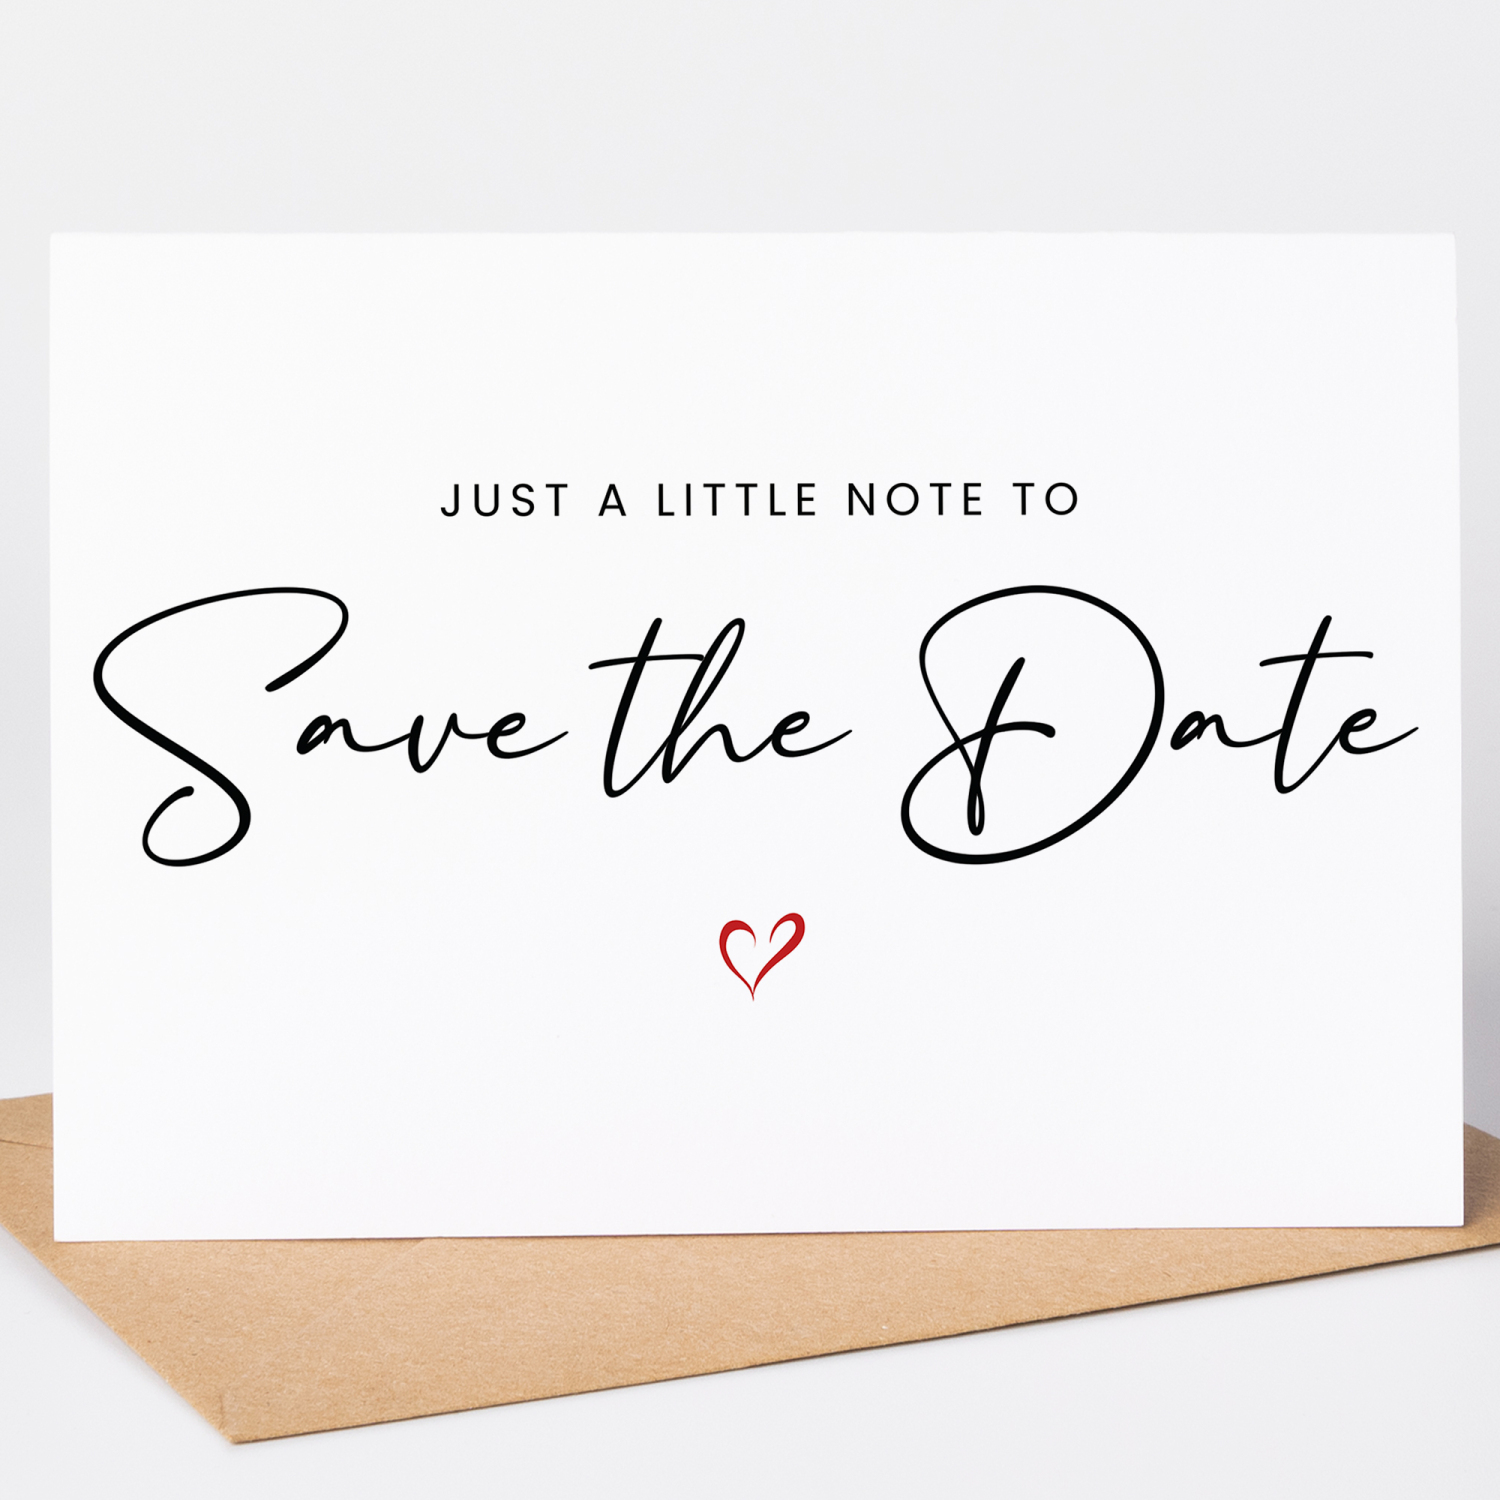 Just a little note to Save the Date Baby Announcement Card - A6 - 4.1" x 5.8"